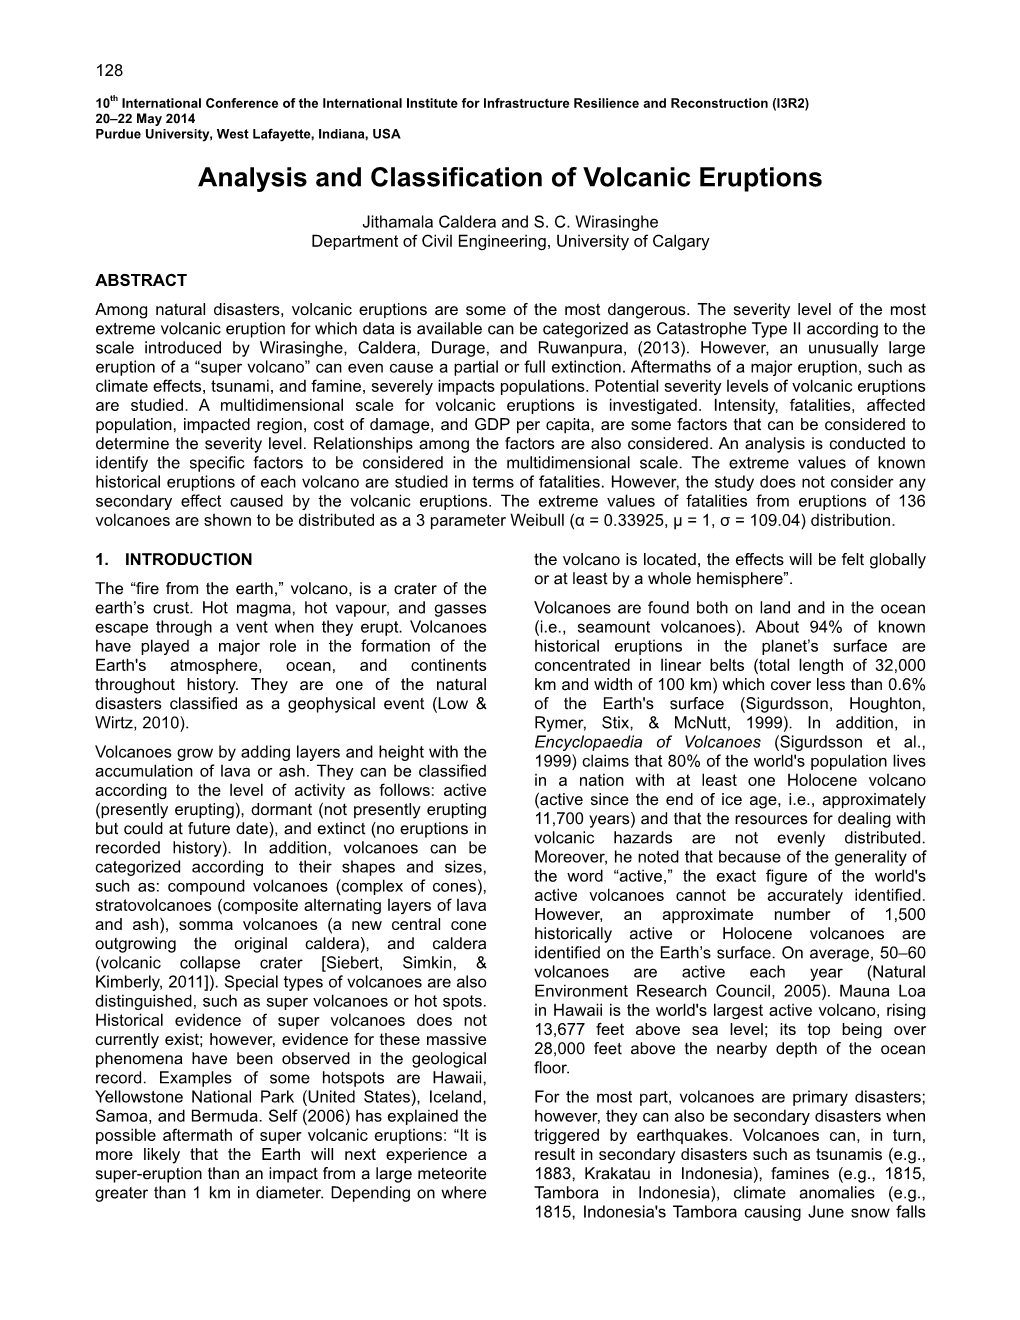 Analysis and Classification of Volcanic Eruptions